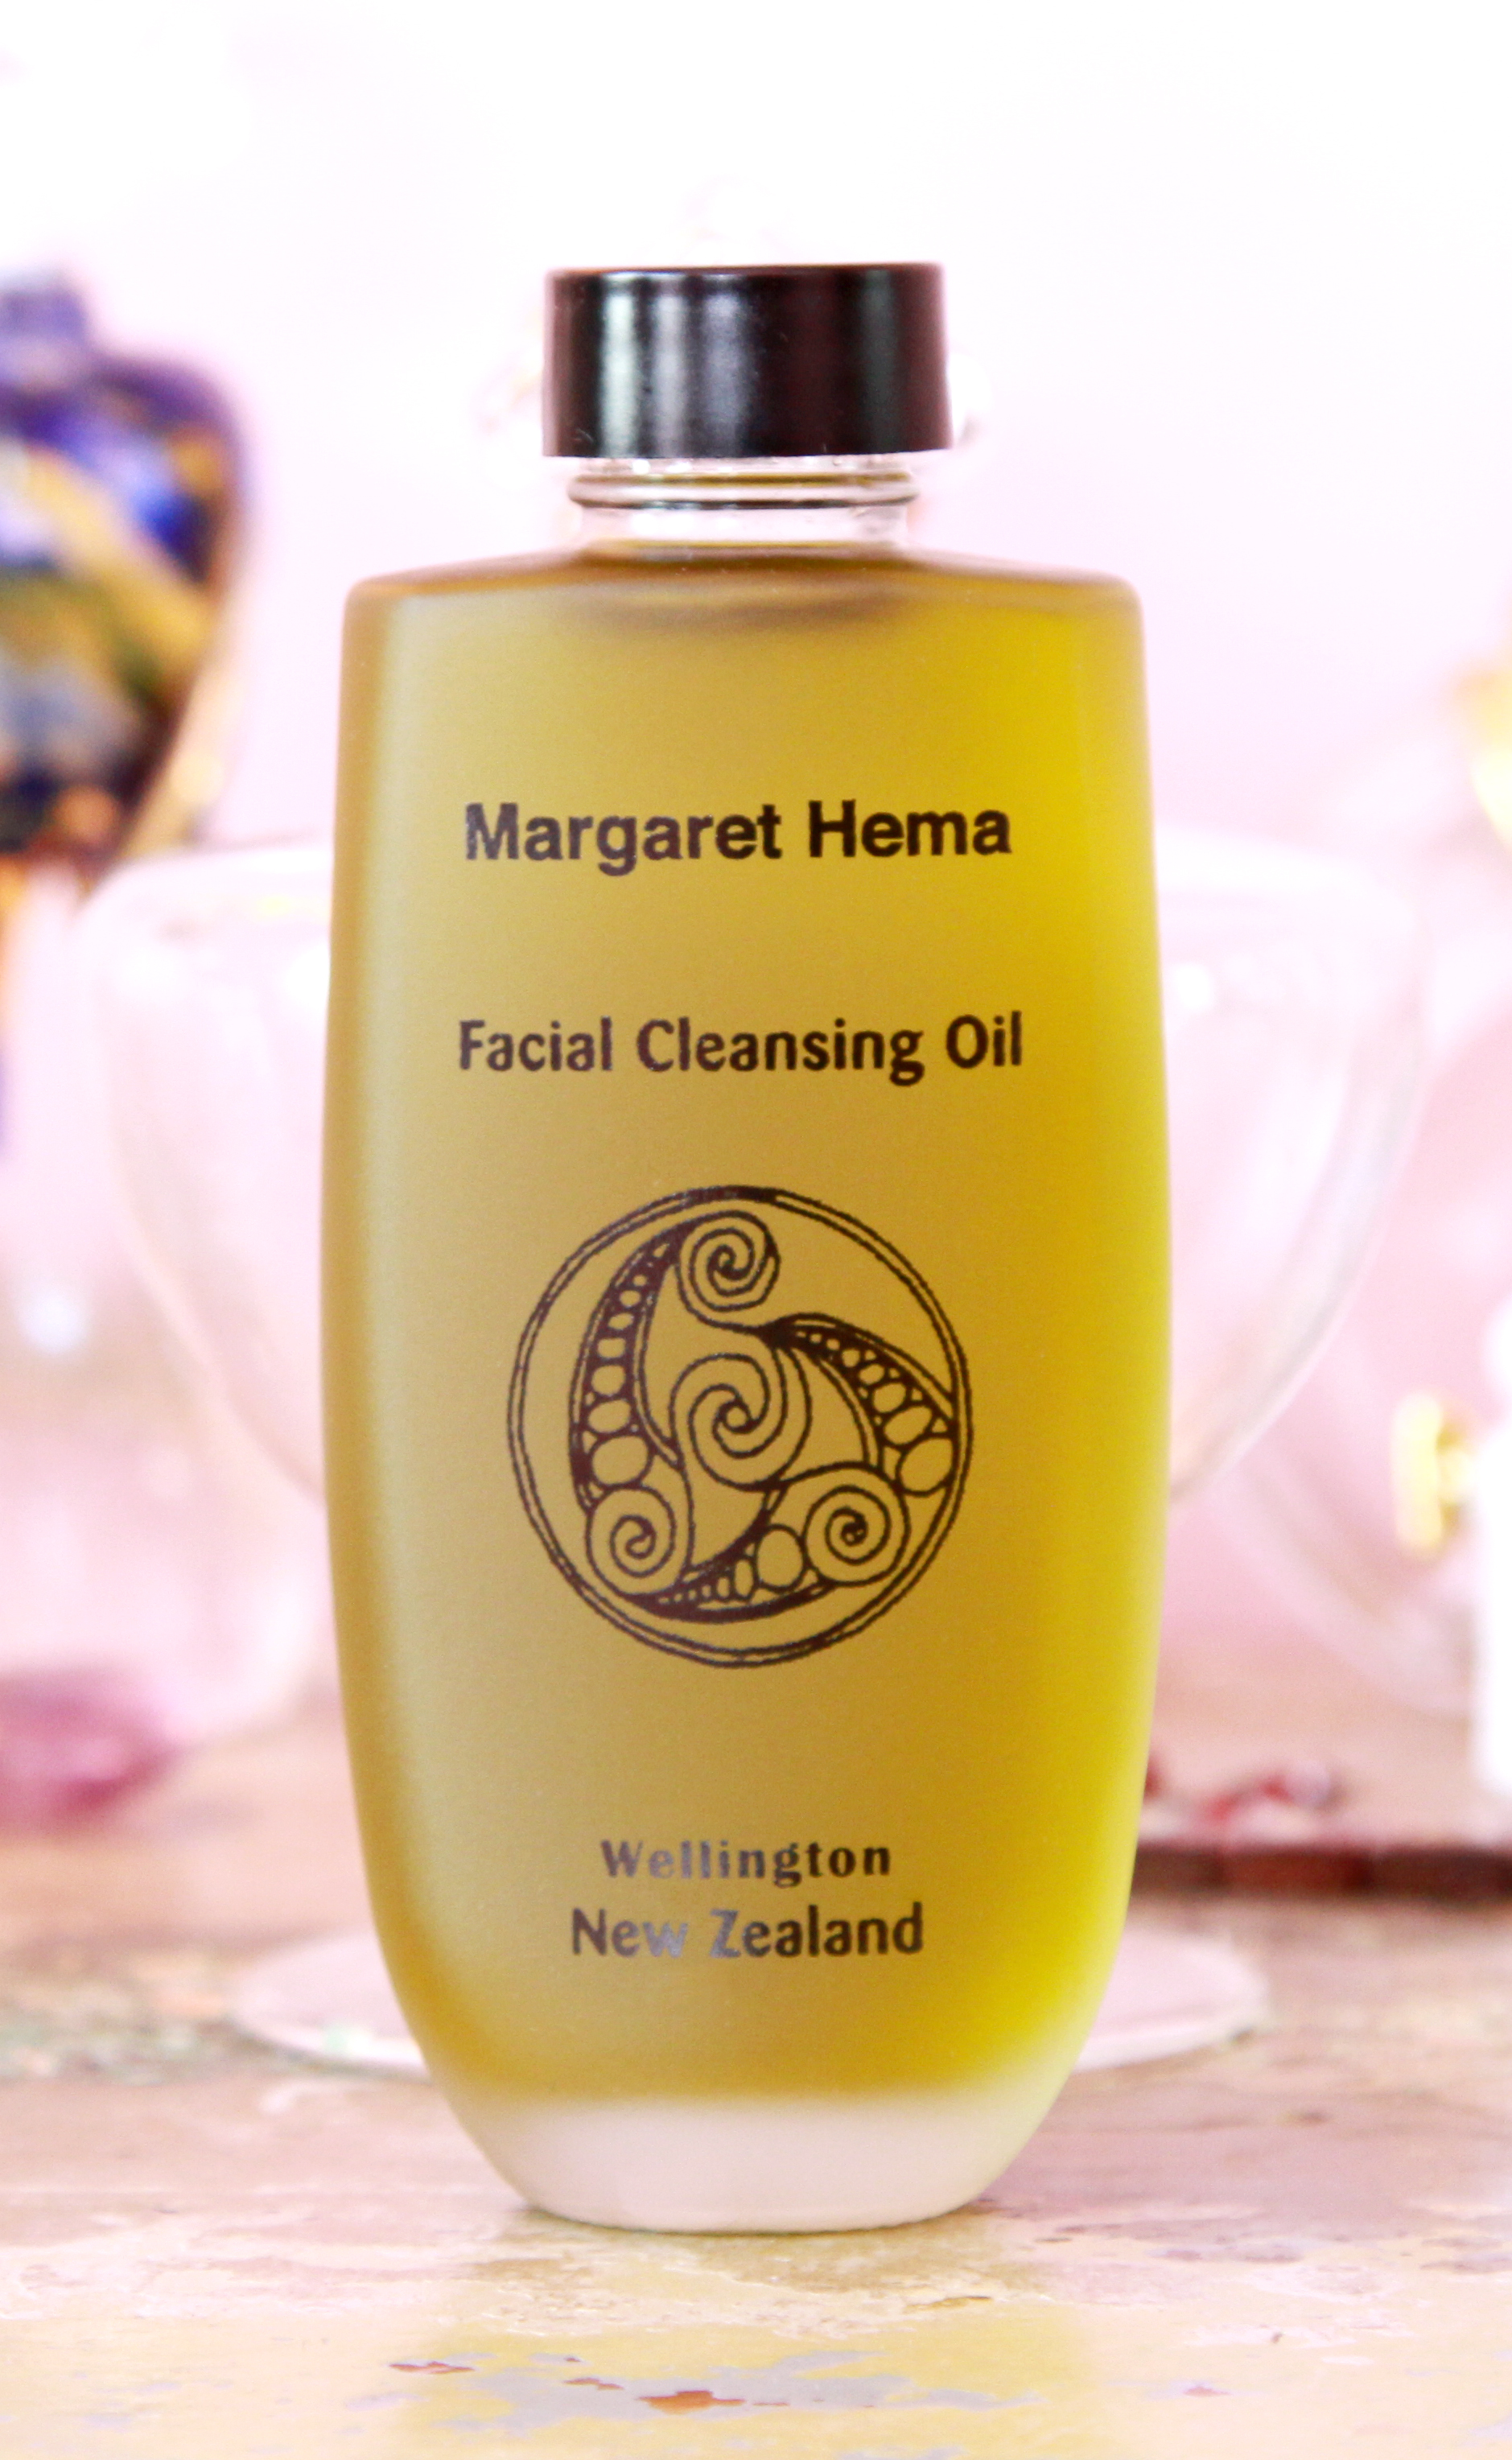 Facial Cleansing Oil — $140.00